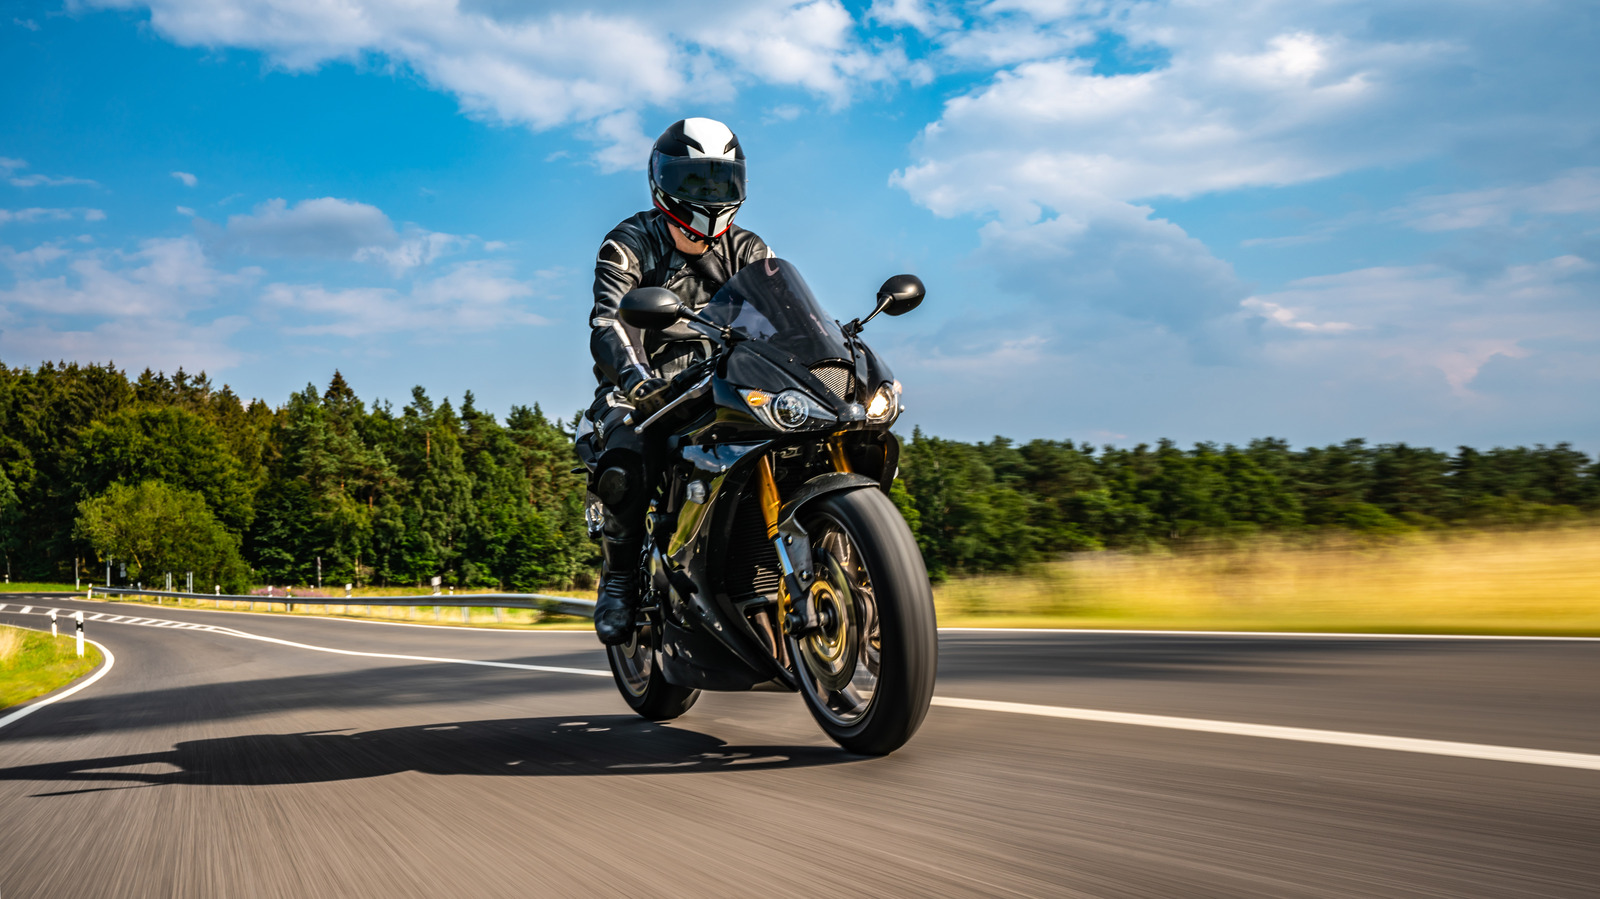 5 Common Mistakes People Make When Riding A Motorcycle